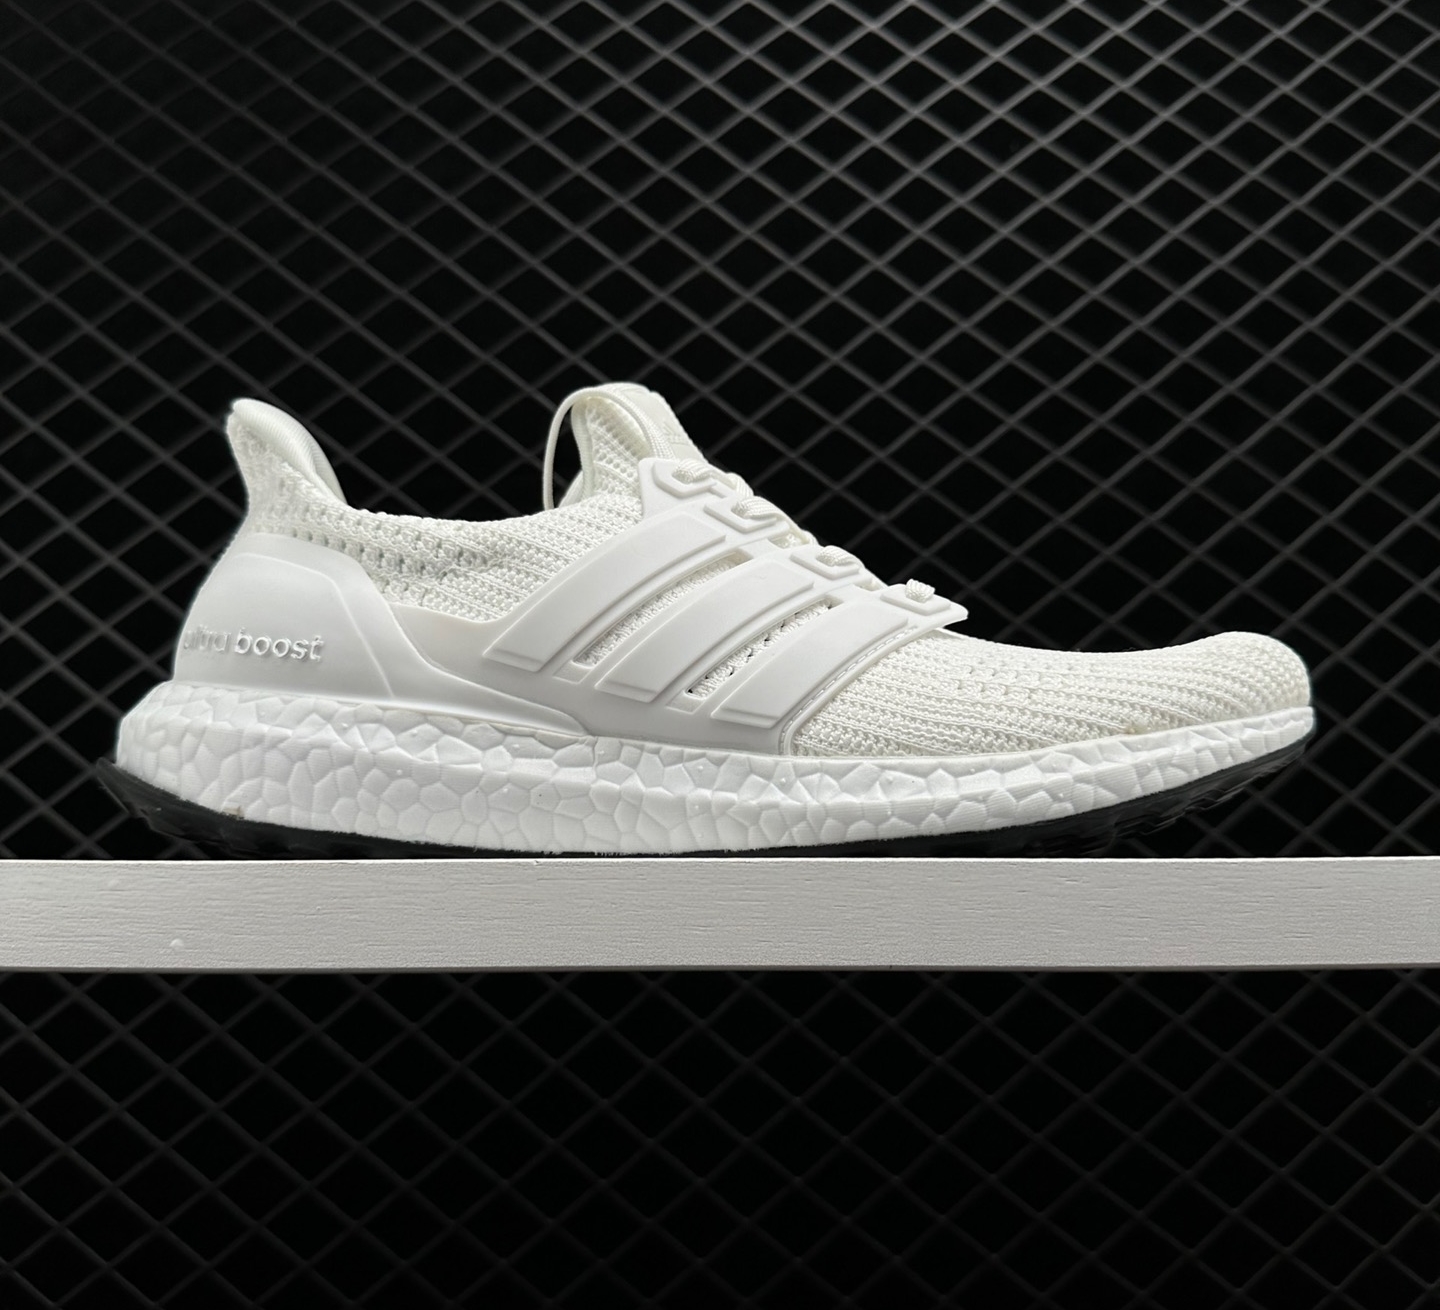 Adidas UltraBoost 4.0 DNA 'Cloud White' FY9120 - Stylish and Performance-Driven Sneakers